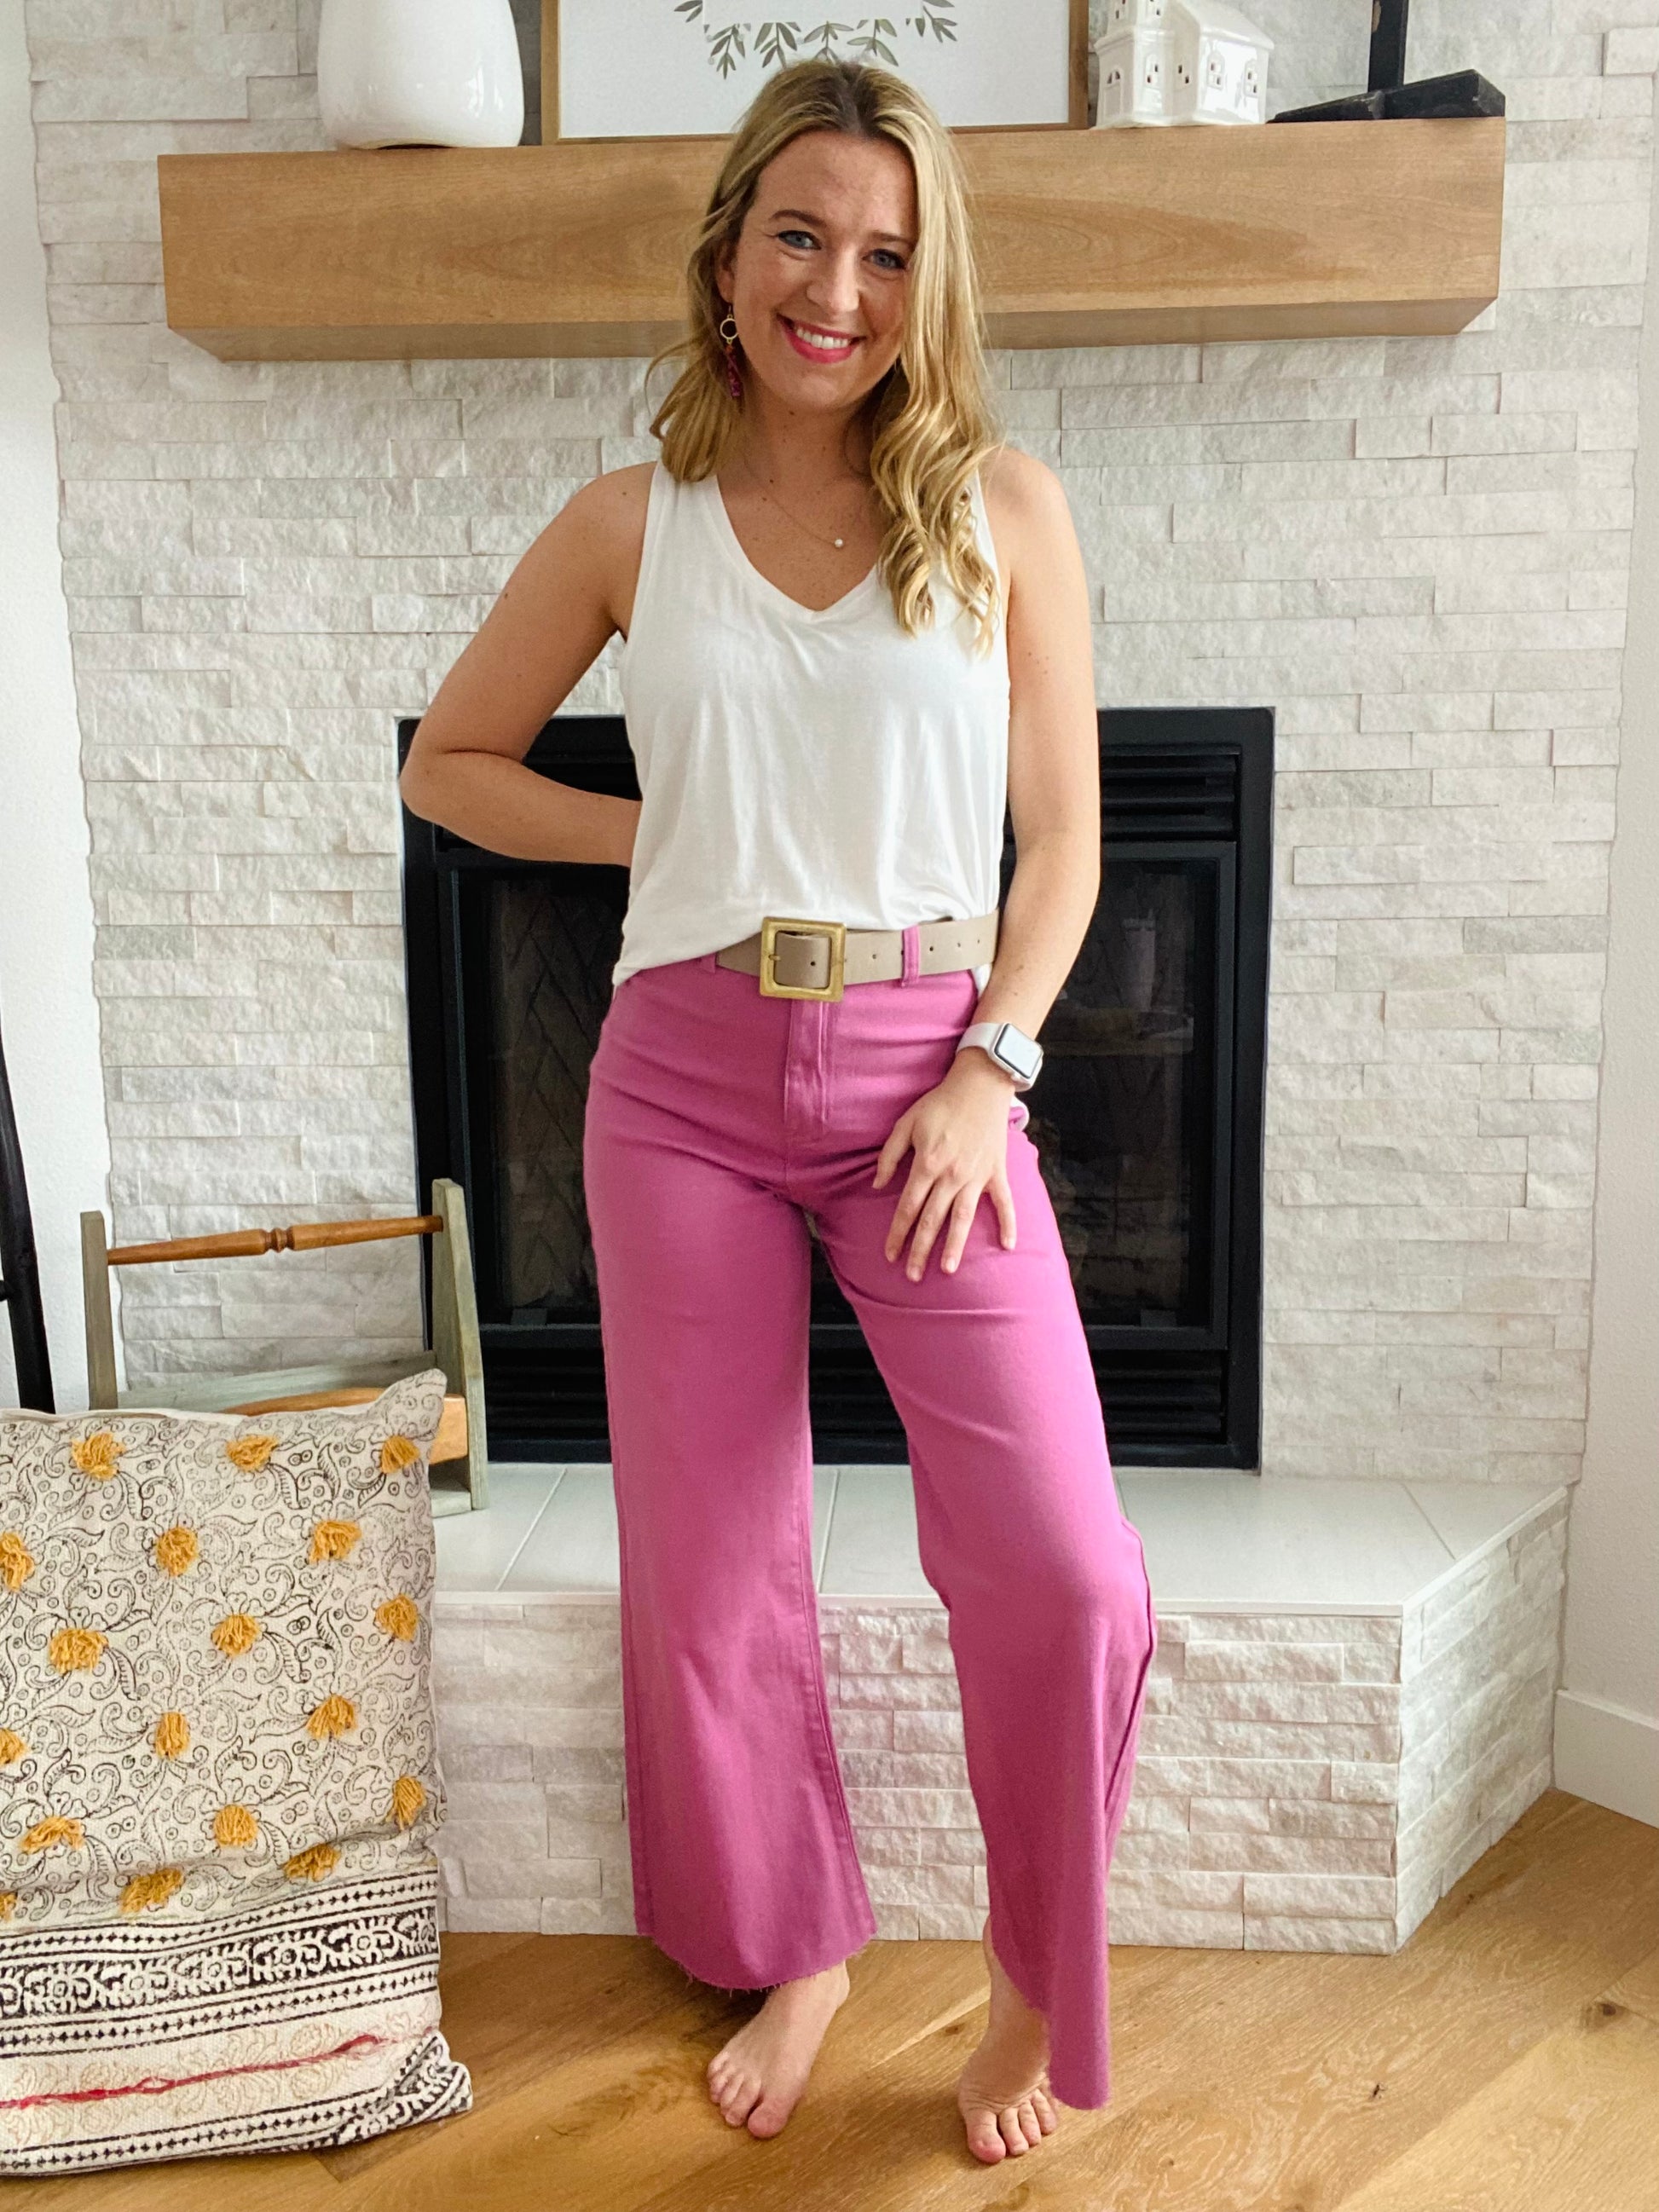 Our Cropped Stretch Jeans are crafted from 97% cotton and 3% spandex for a comfortable yet flattering fit. This wide leg, high waisted style features a clean cut hemline and is available in sizes Small (2-4), Medium (6-8), Large (8-10) and XL (10-12). These bottoms are perfect for work all summer long paired with a fun blouse and strappy sandals! 